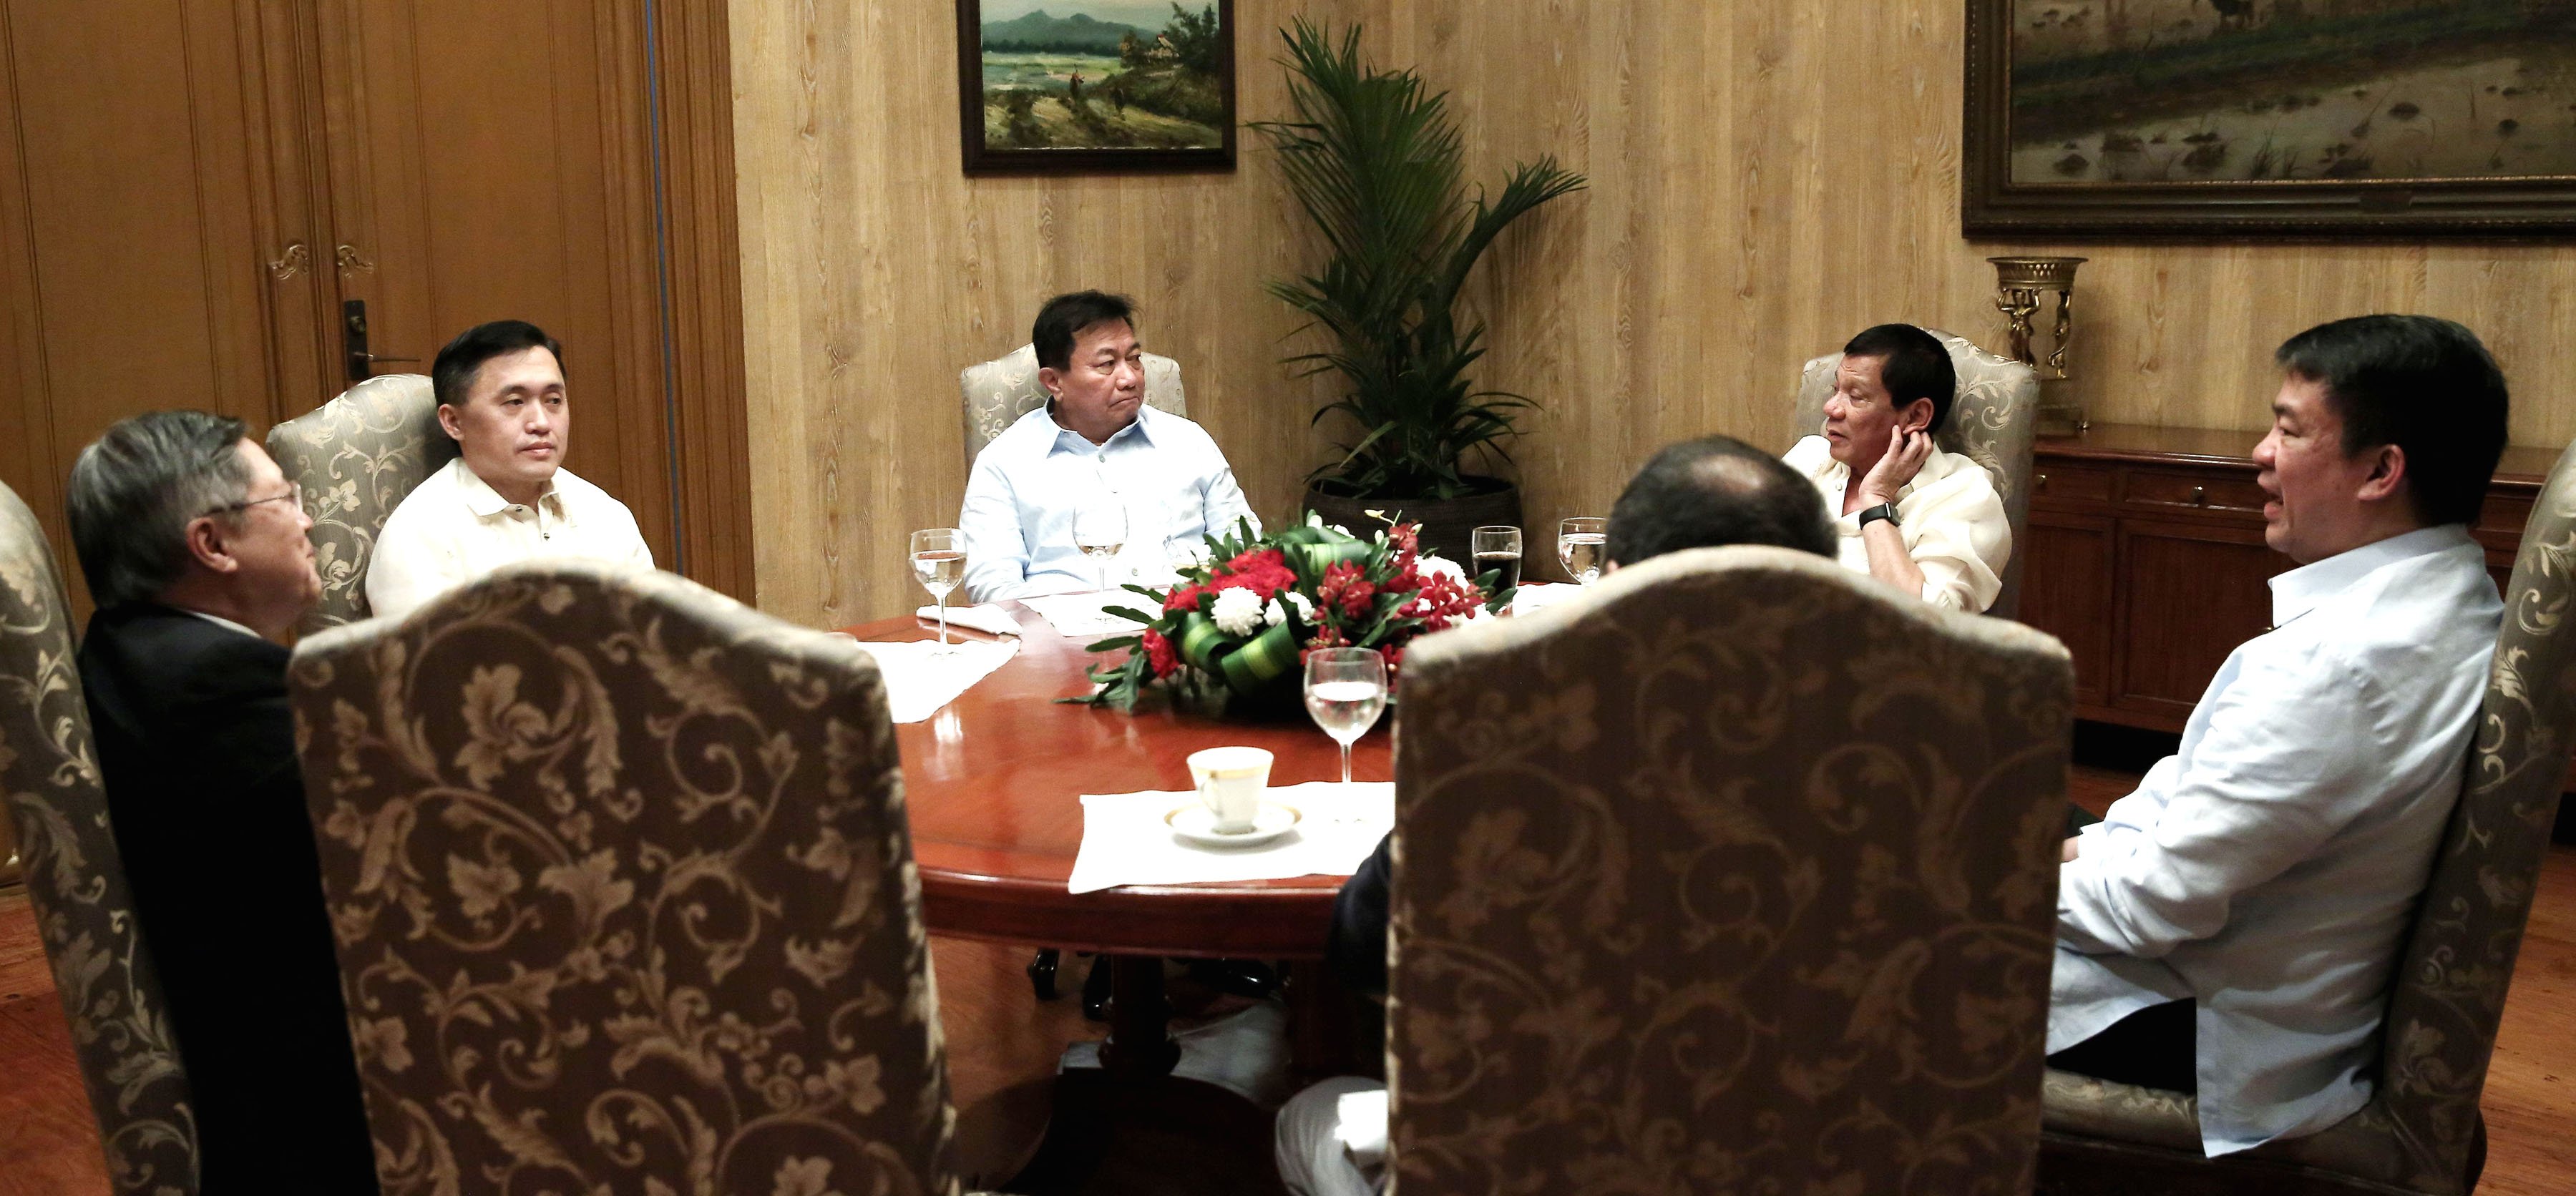 Pres. Duterte holds a meeting with House Speaker Alvarez, Special Asst. to the President Lawrence Go, Finance Sec. Dominguez III and Senate Pres. Pimentel III